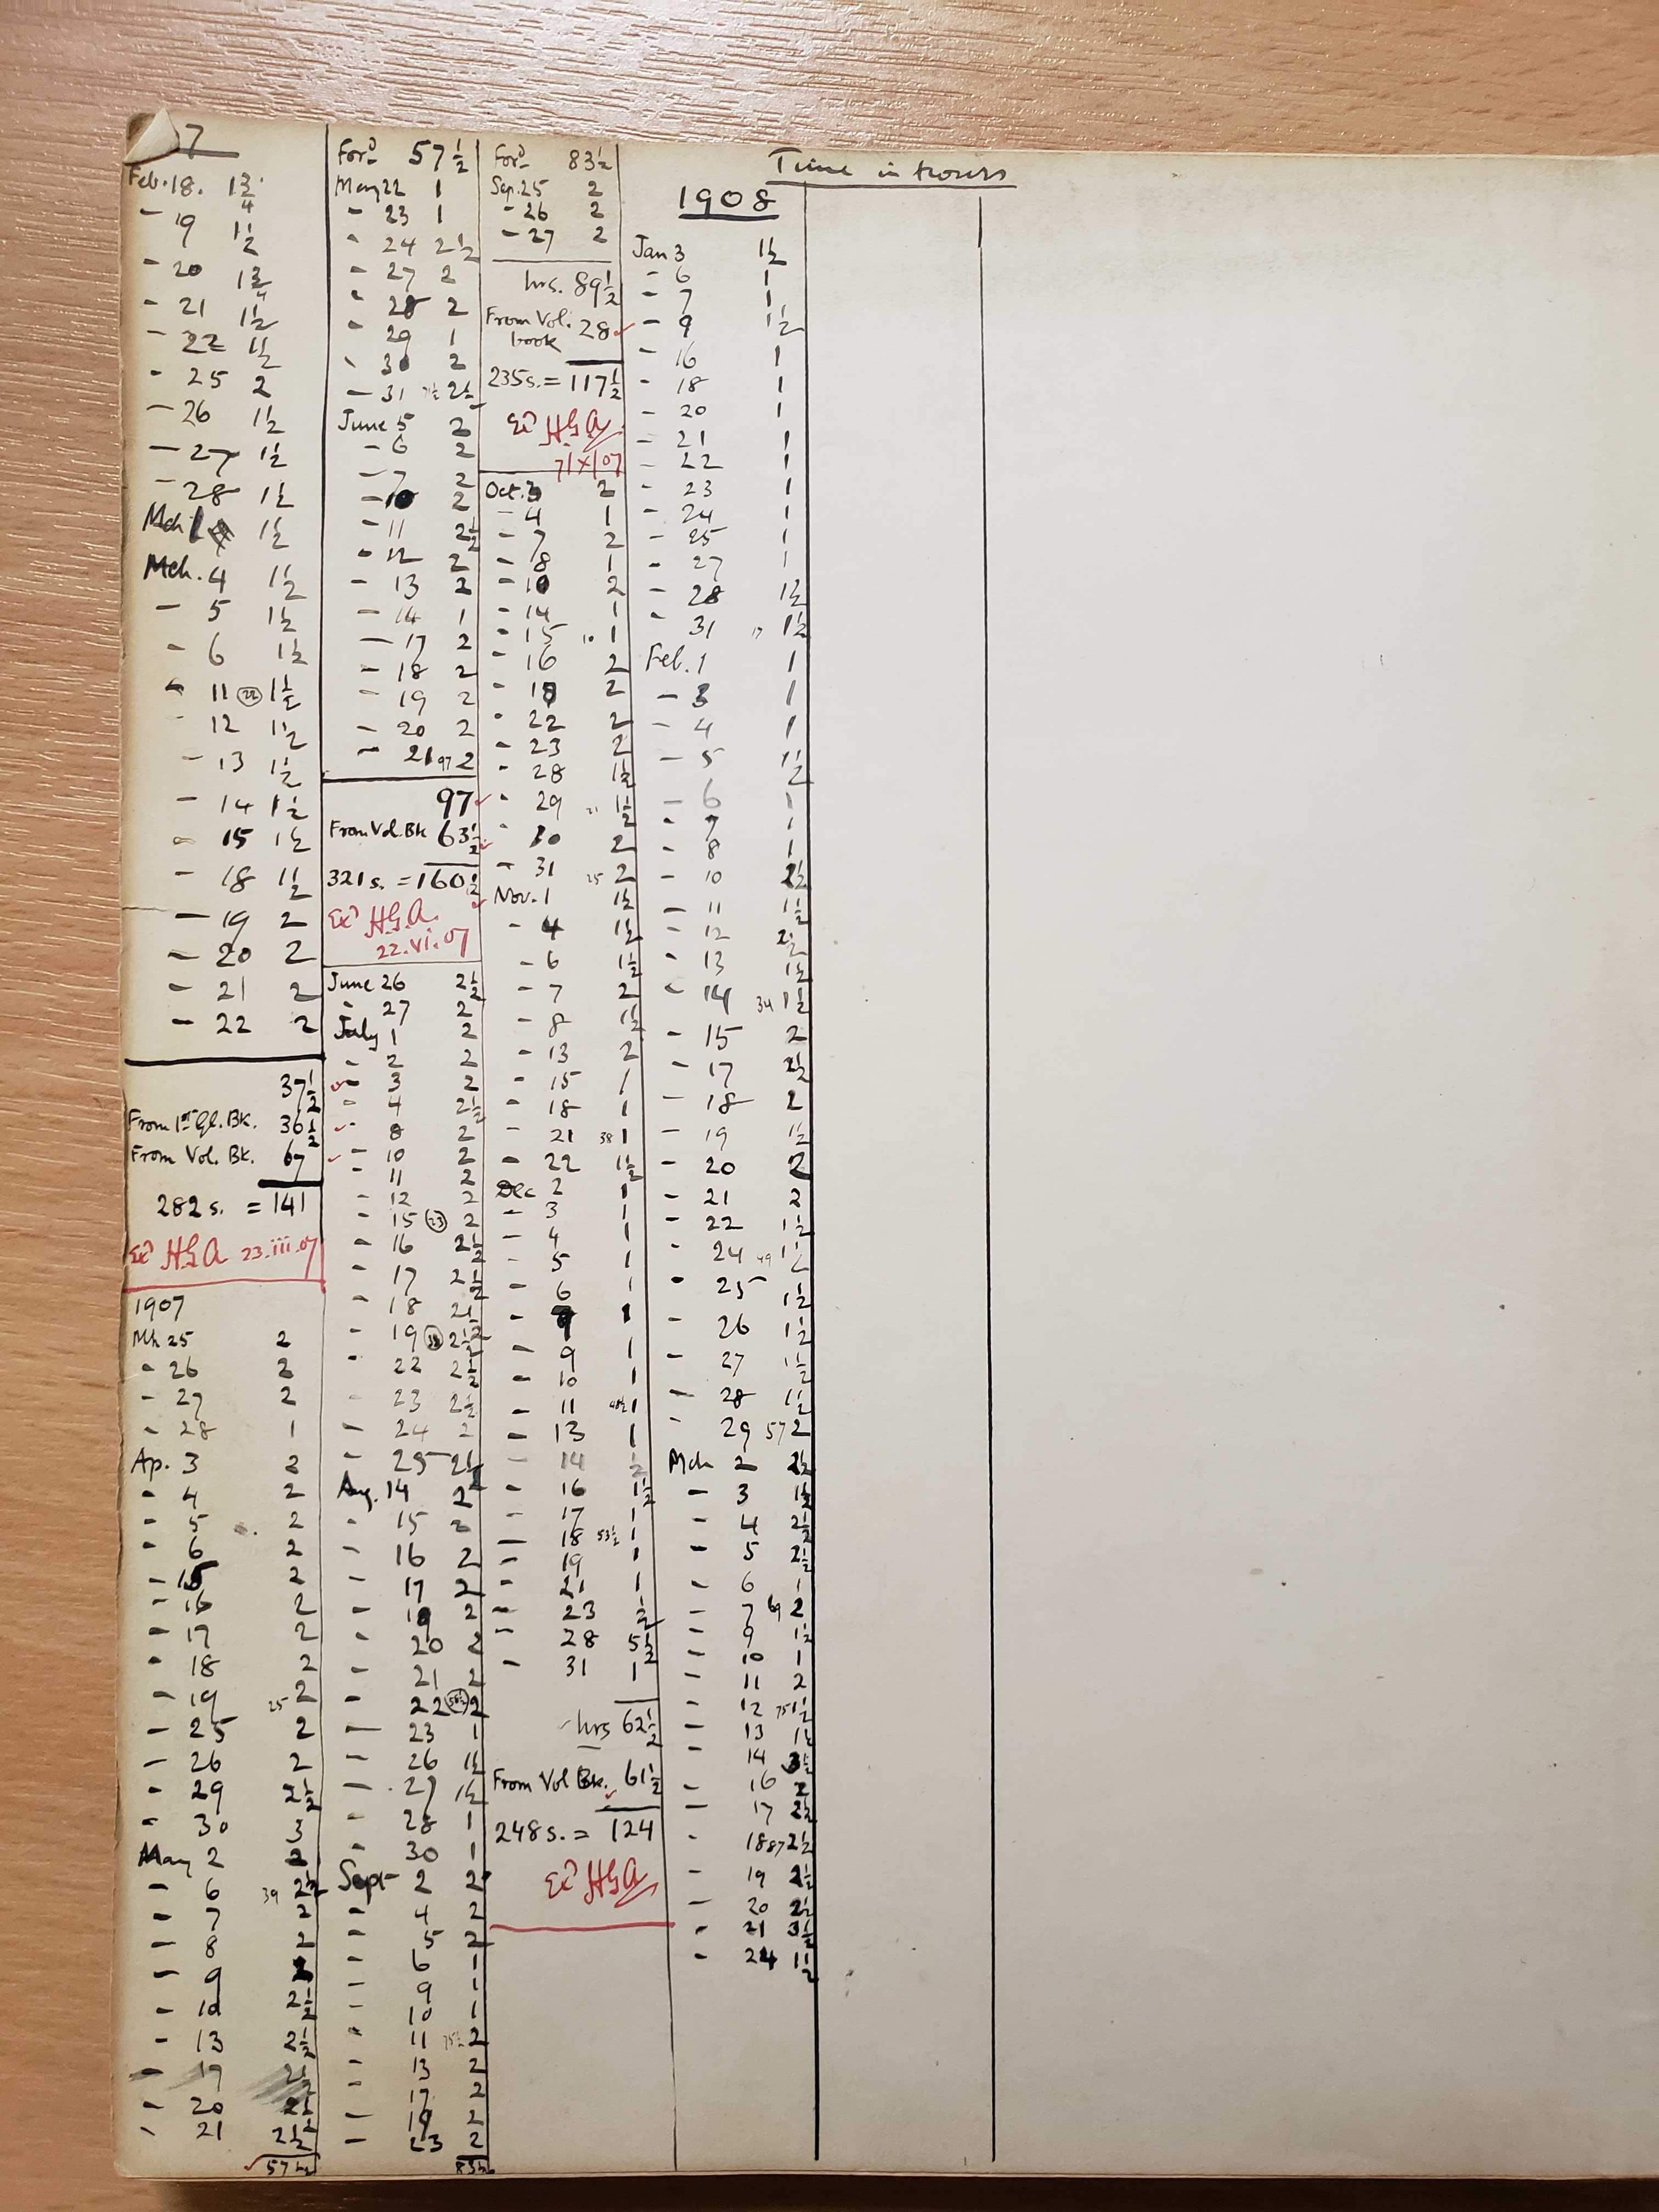 Record of Worman's hours